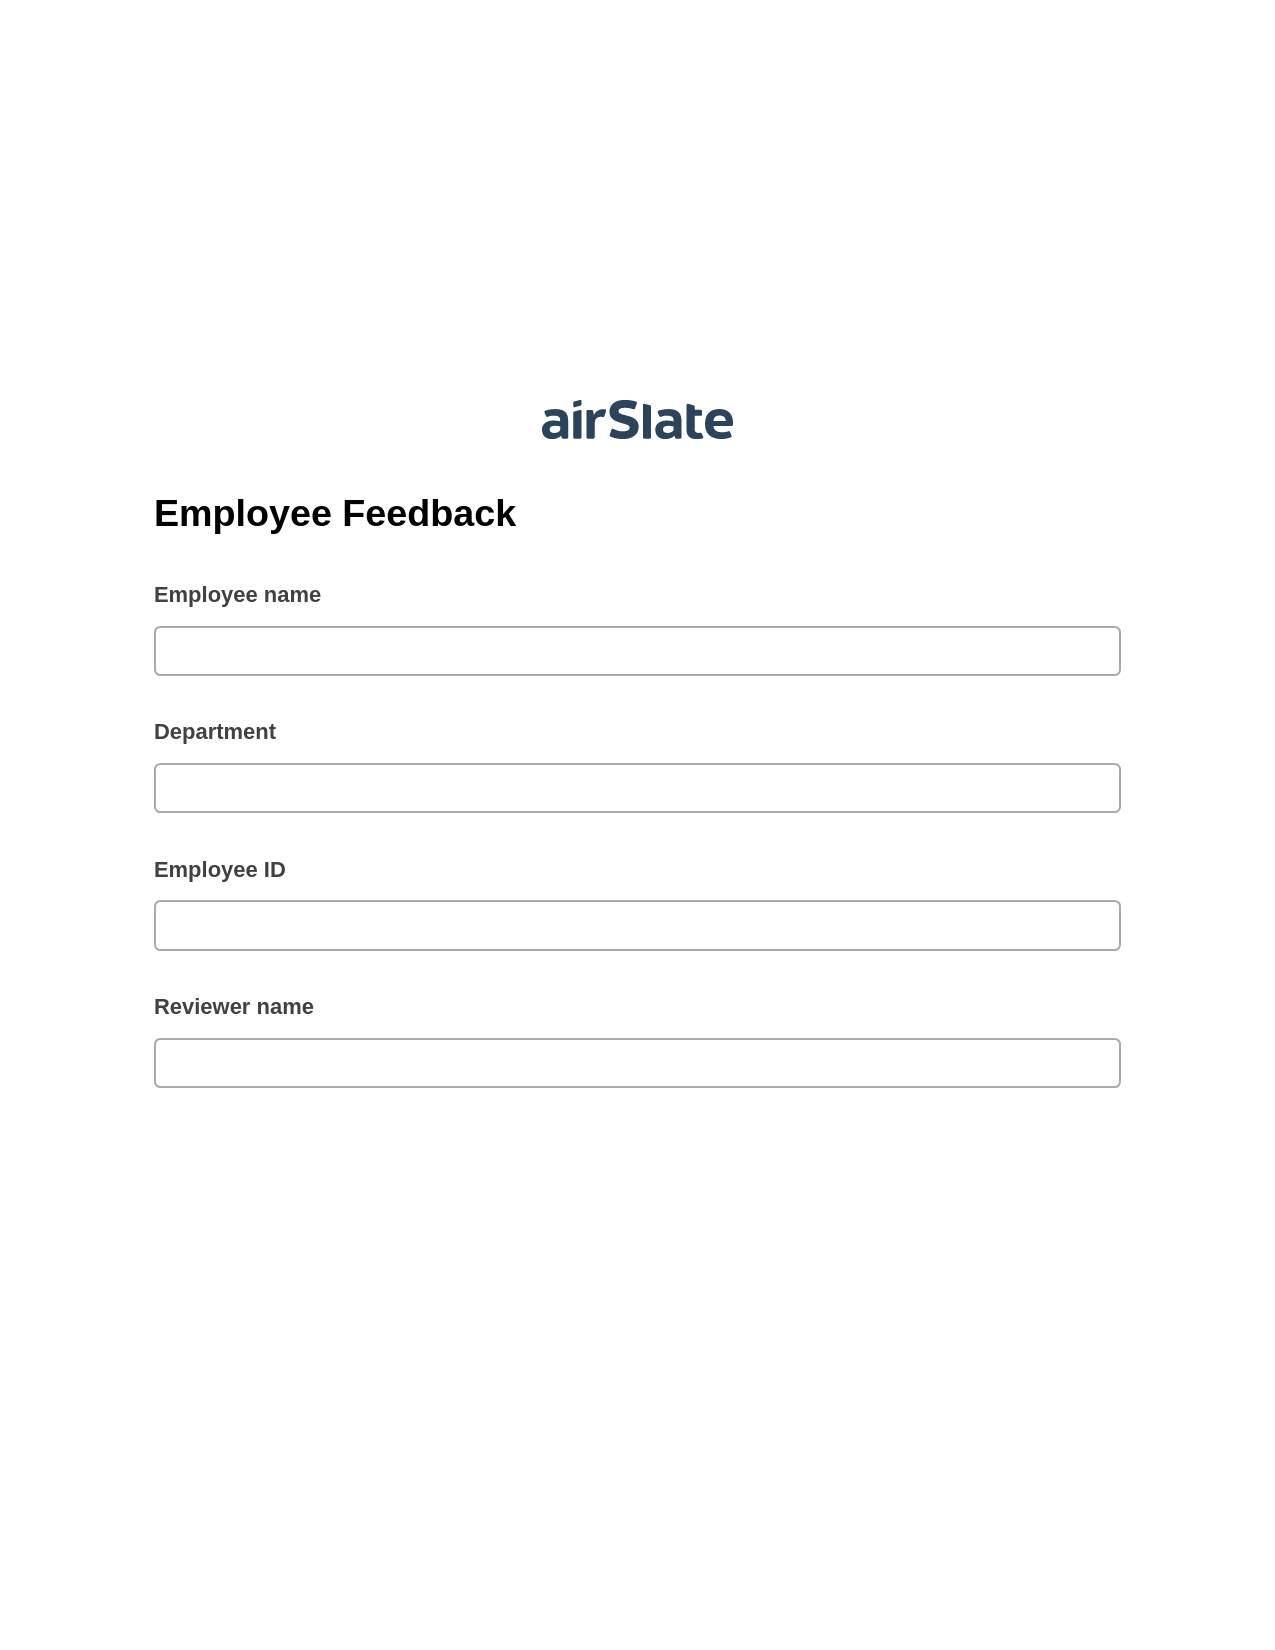 Employee Feedback Pre-fill from Excel Spreadsheet Bot, Create slate addon, Export to NetSuite Record Bot